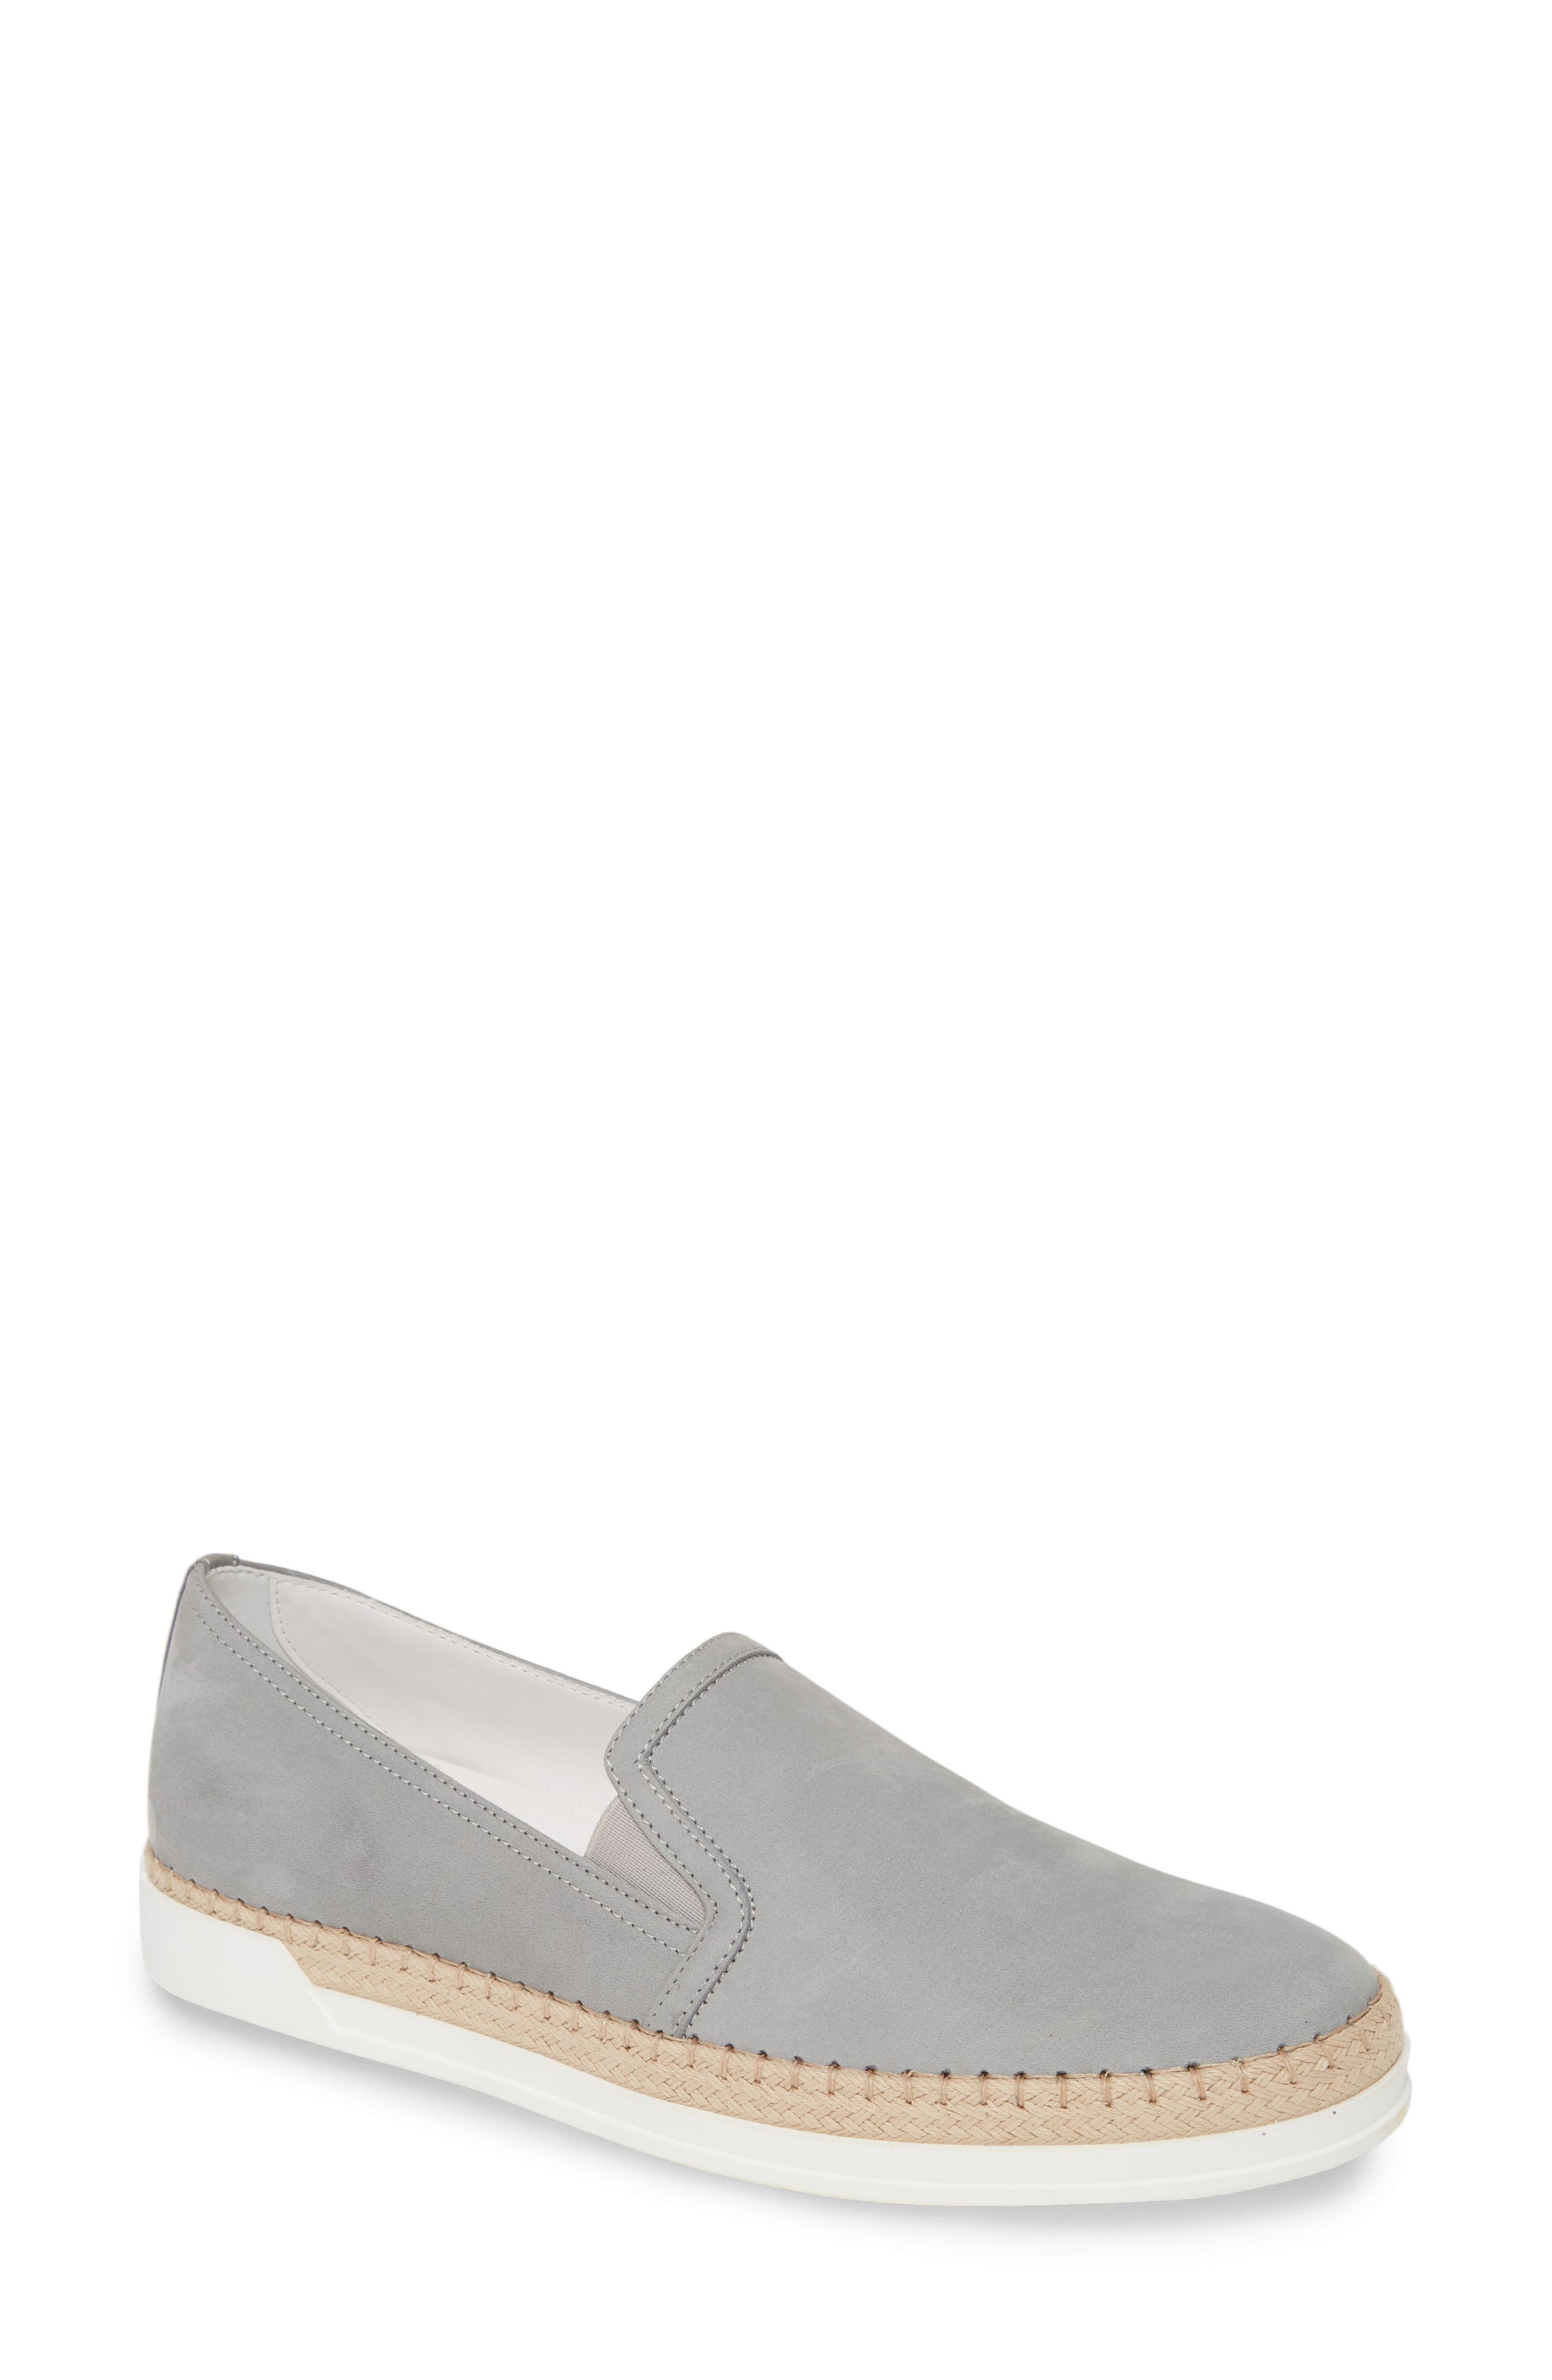 tods sneakers womens sale